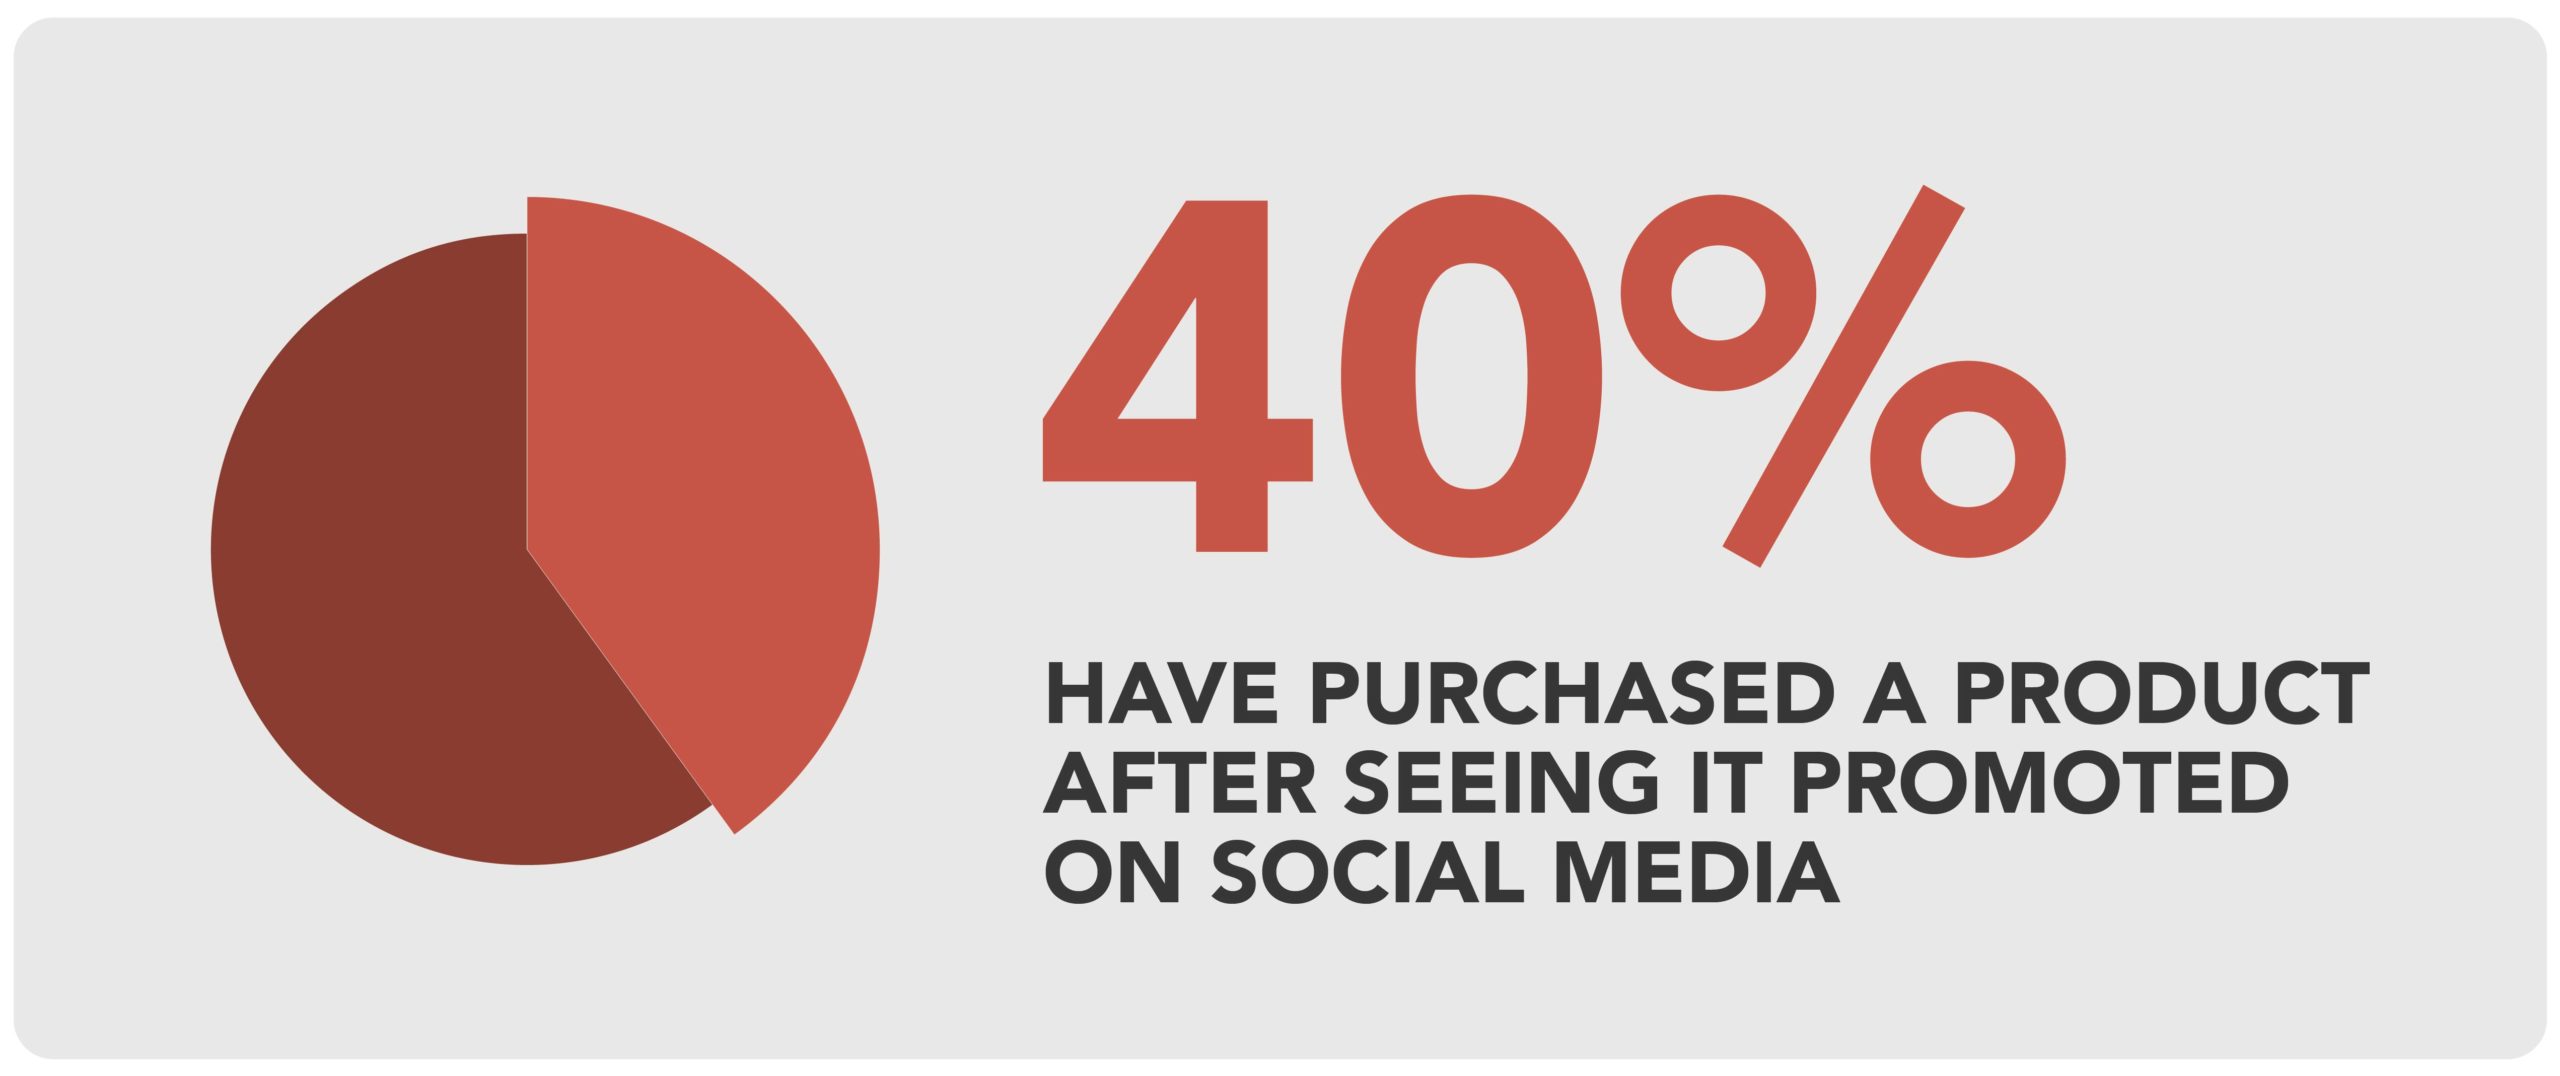 40% have purchased products after seeing them on social media